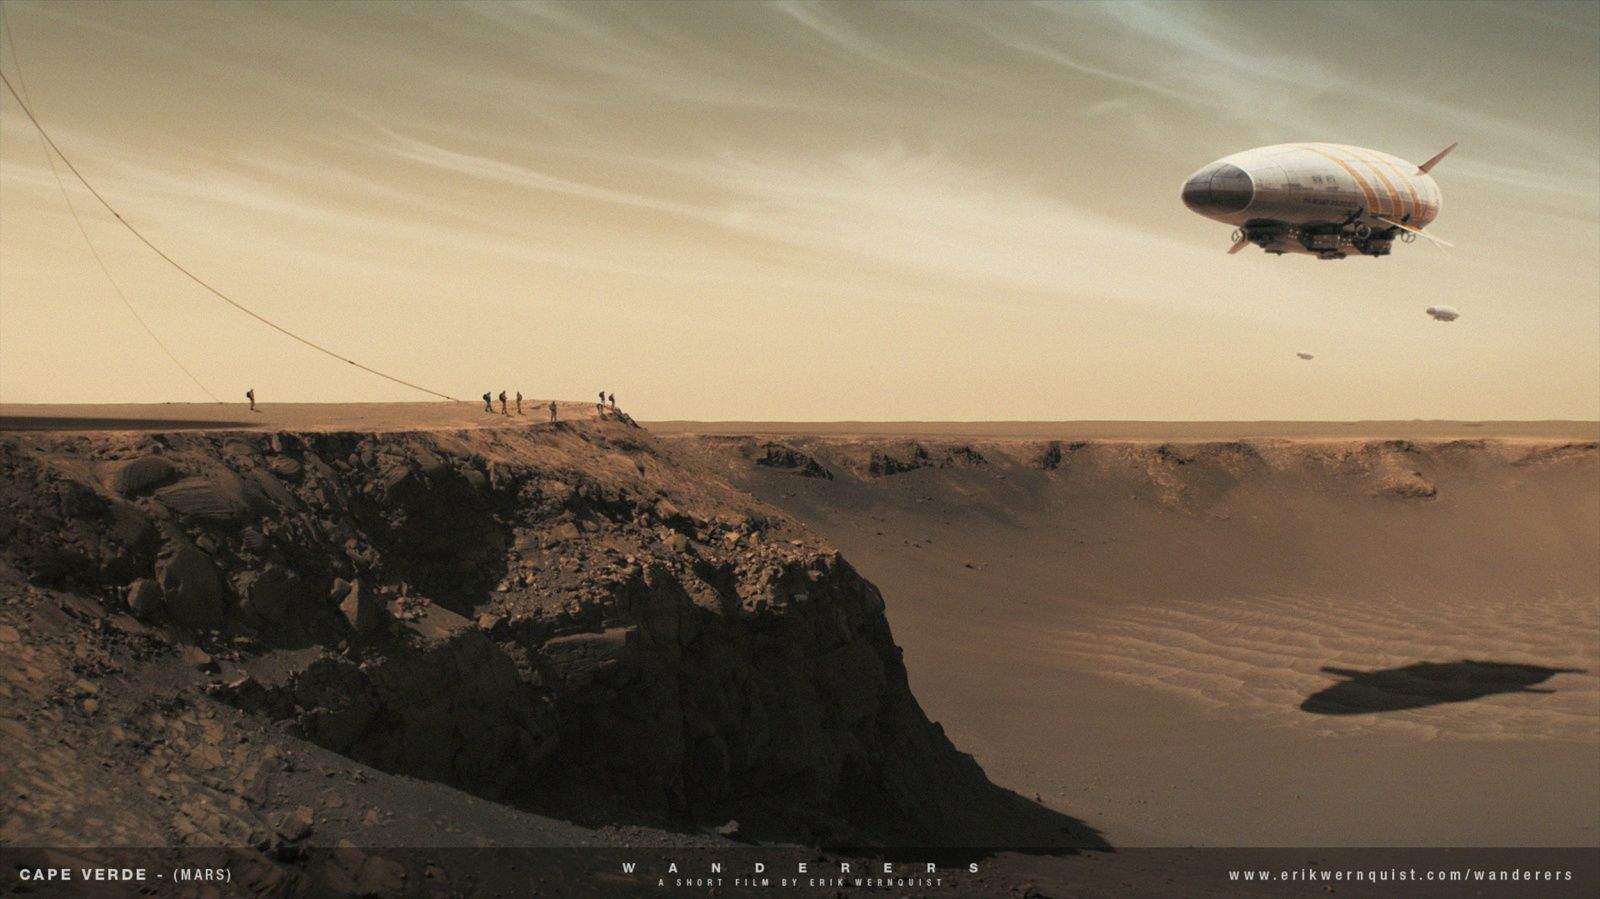 A group of people await the arrival of a few dirigibles at the edge of the Victoria Crater on Mars in Erik Werquist's short film 